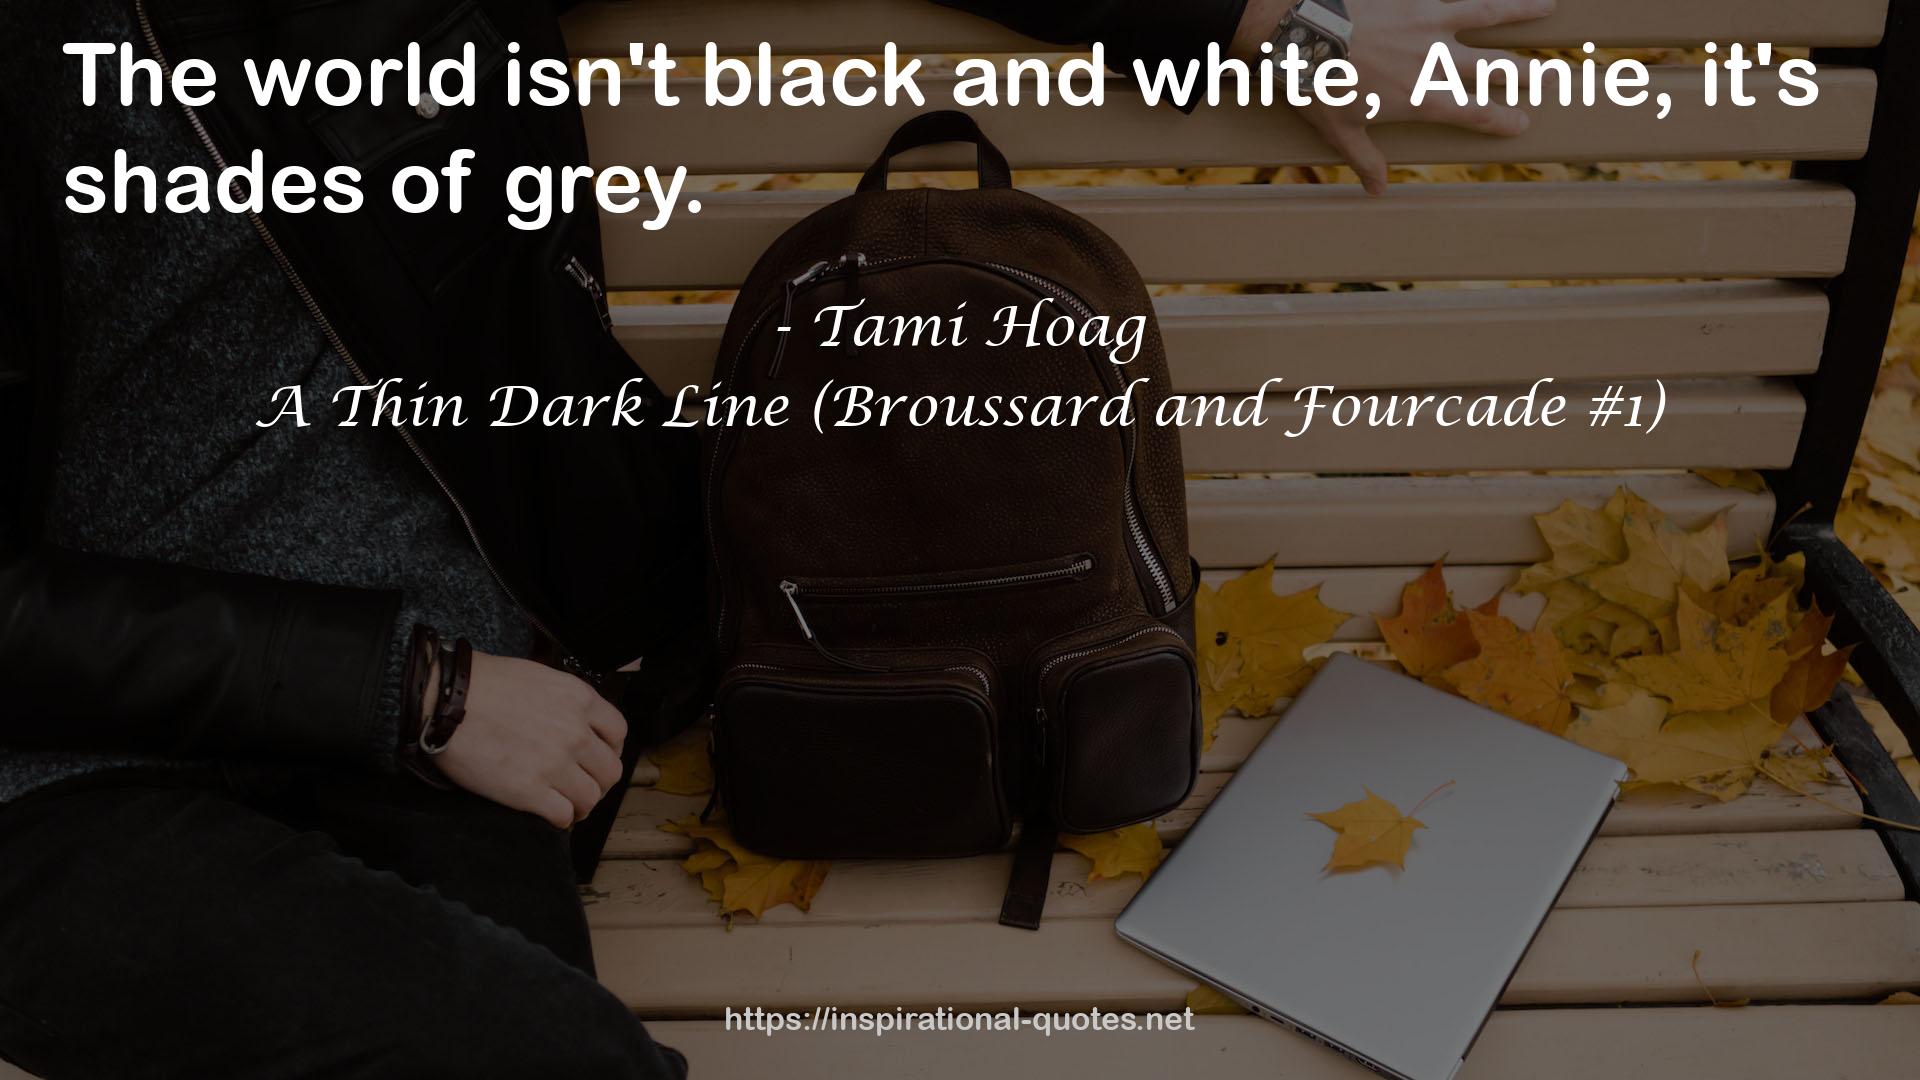 A Thin Dark Line (Broussard and Fourcade #1) QUOTES